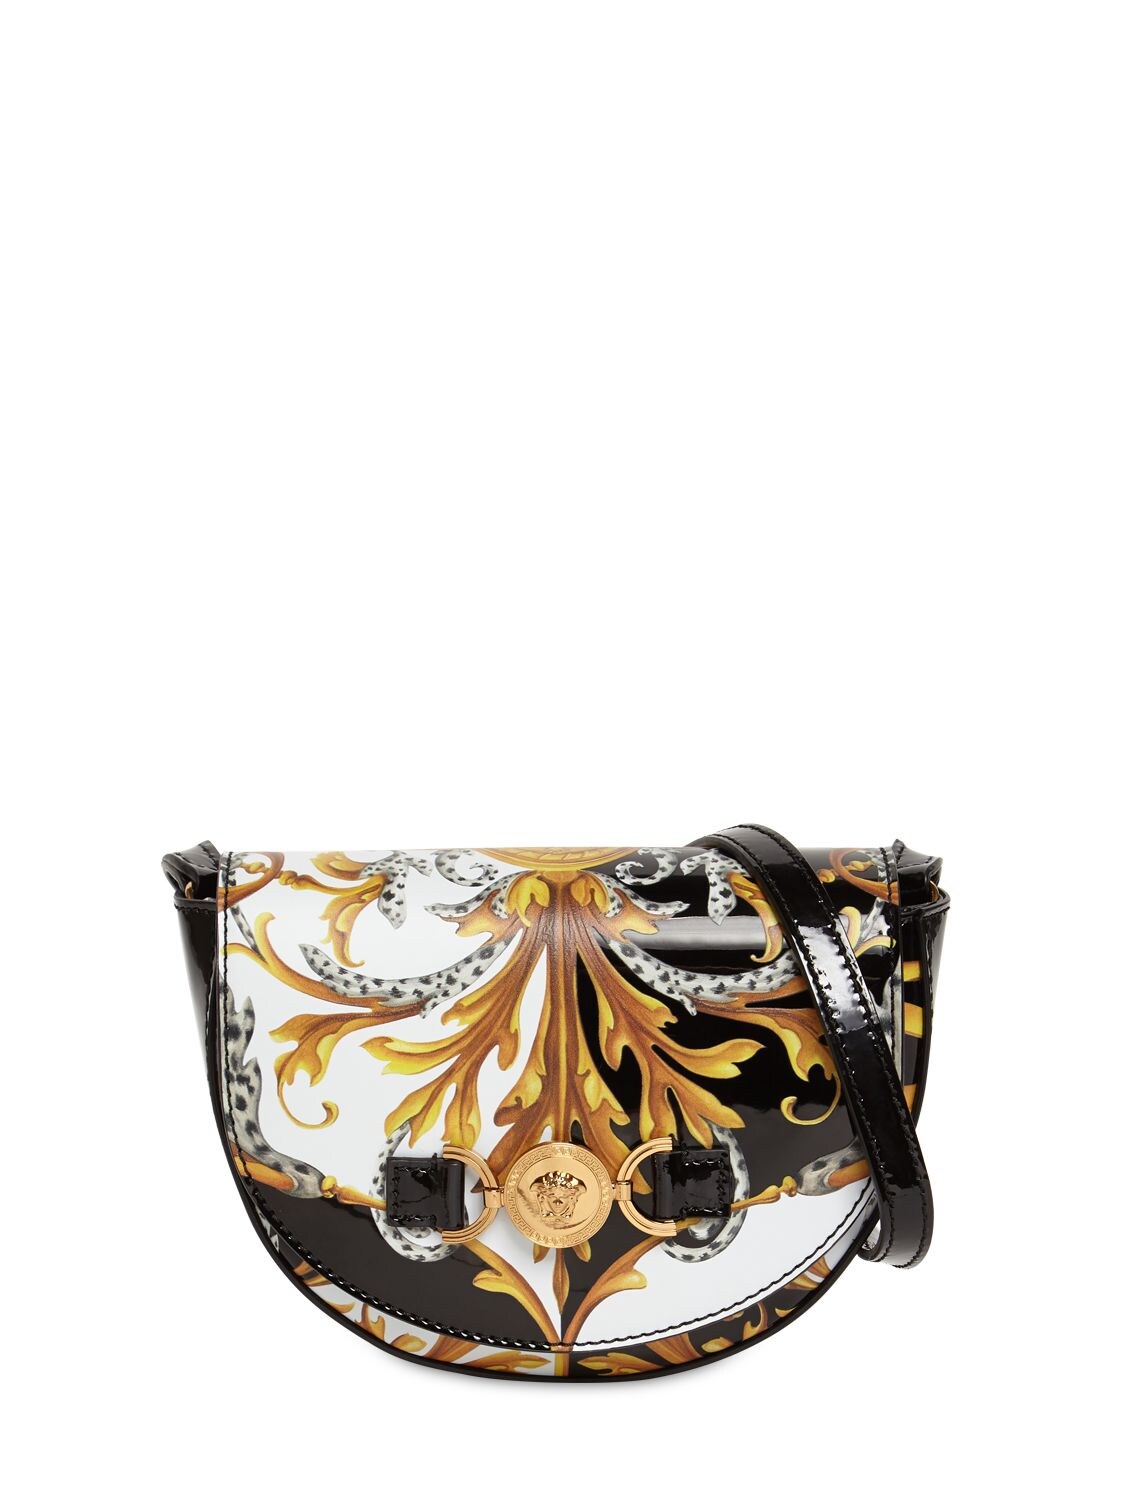 VERSACE BAROQUE PRINT PATENT LEATHER BAG,72ILXR004-WVNKR0Y1